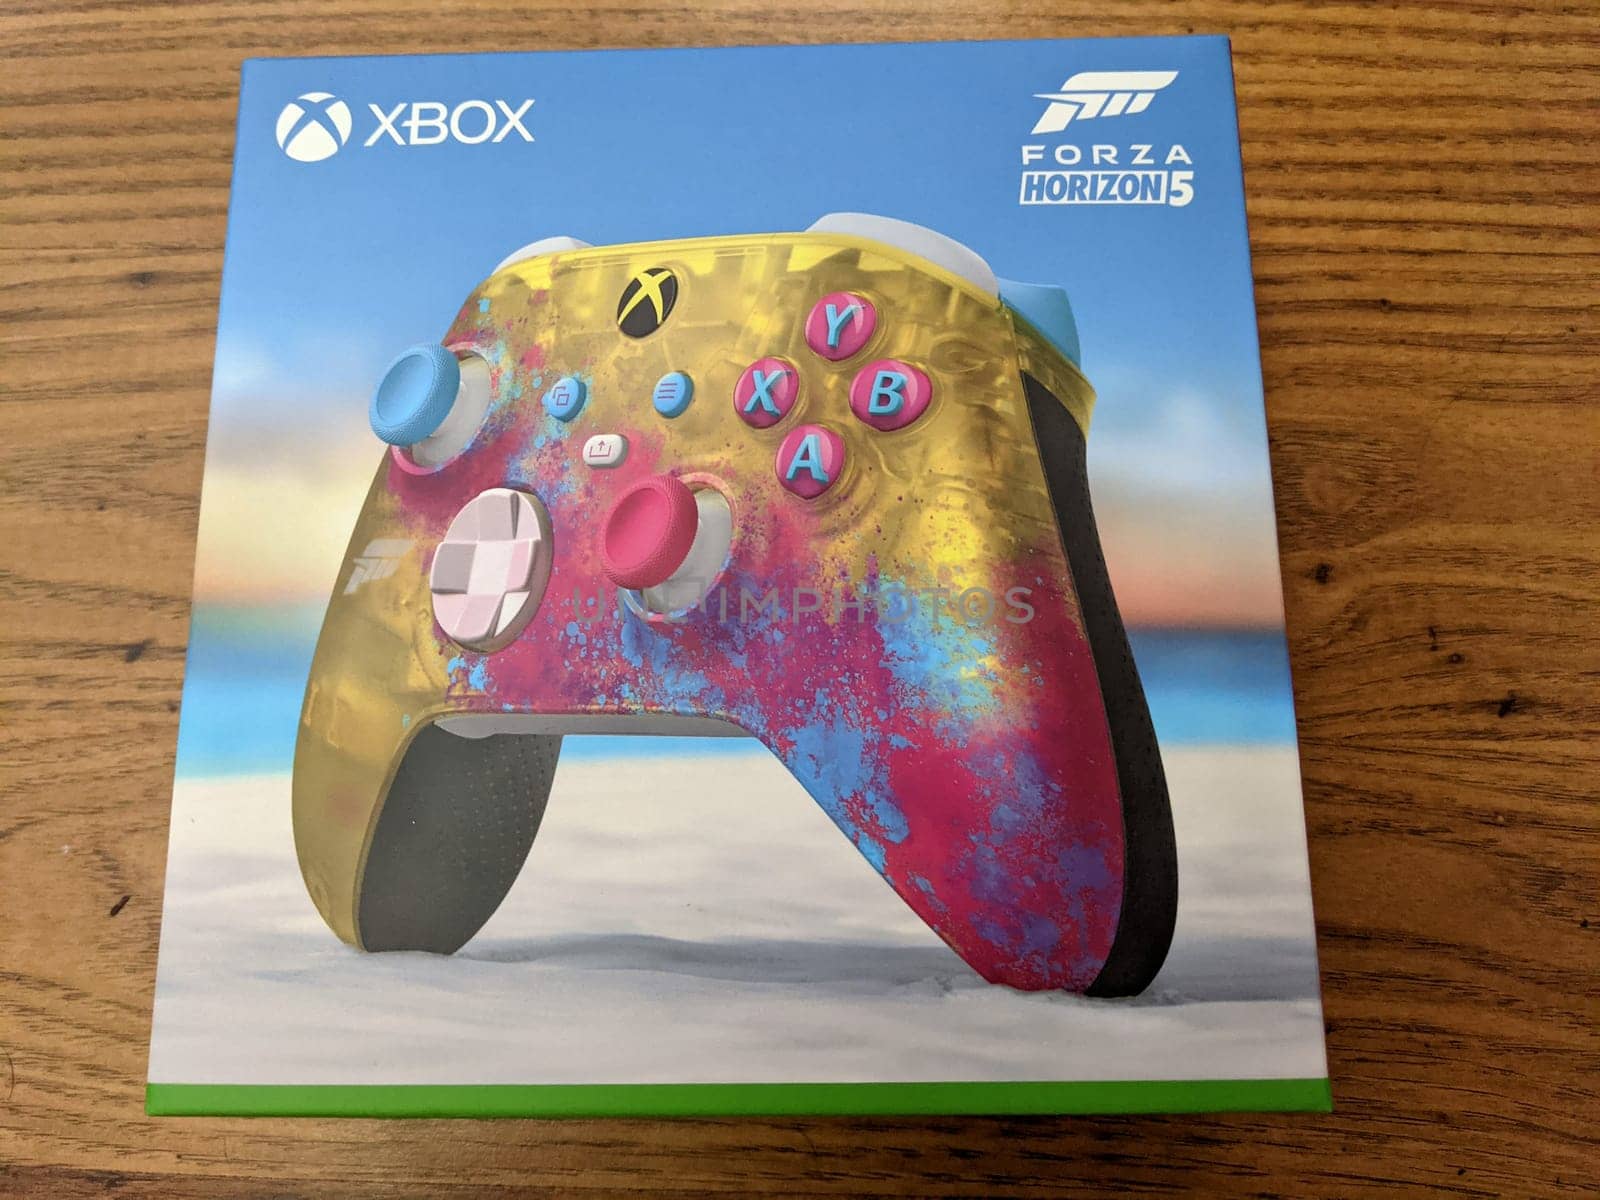 Honolulu - November 9, 2021:  A colorful and unique Xbox controller with a Forza Horizon 5 design. The controller features a transparent yellow finish, a color-shifting hybrid D-pad, and textured grips. The photo shows the Xbox and Horizon 5 logos on the controller and the background.